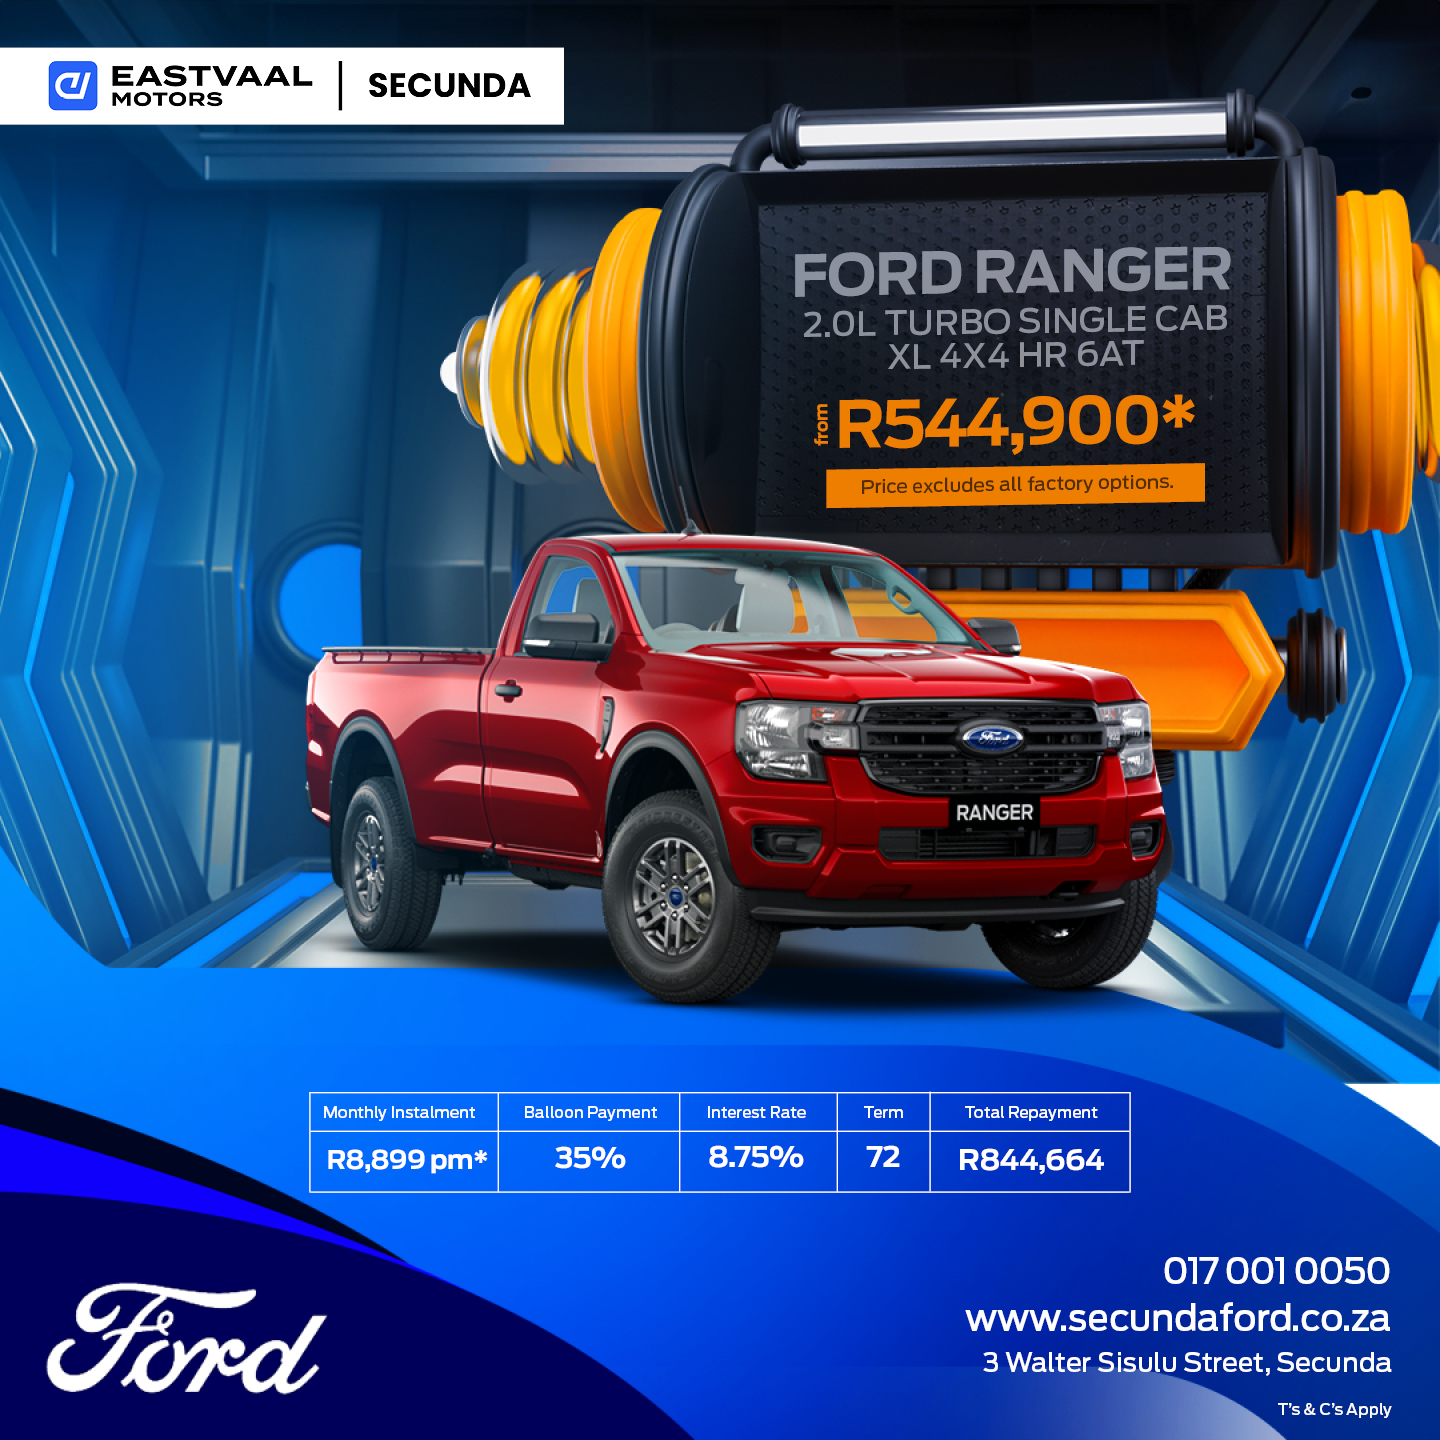 Ford Ranger 2.0L Turbo Single Cab XL 4×4 HR 6AT image from Eastvaal Motors